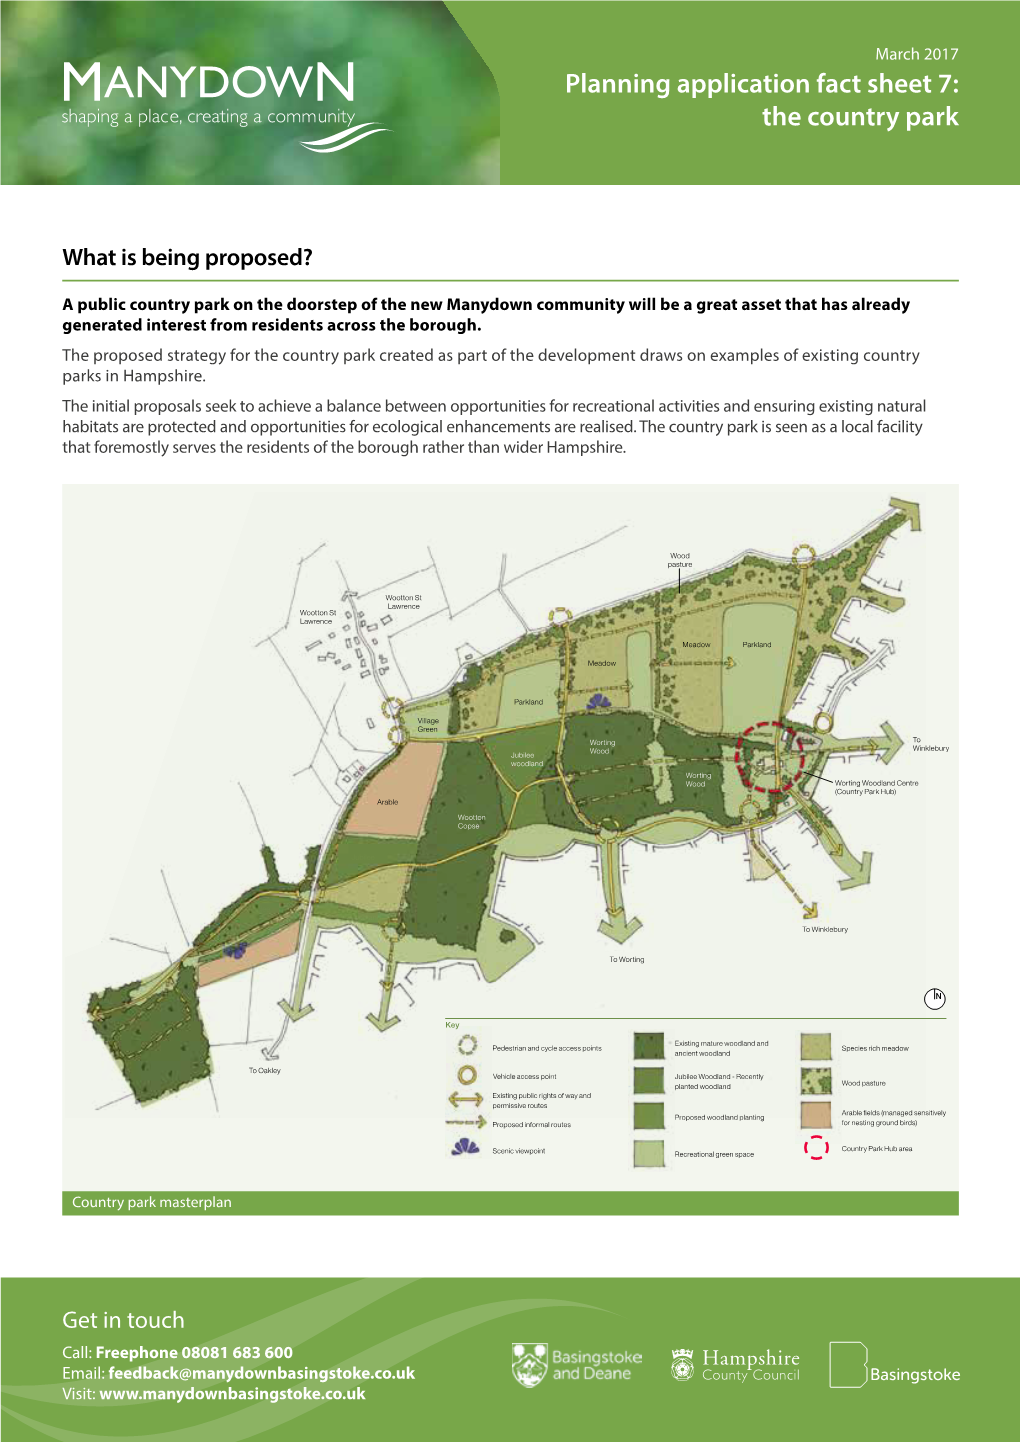 Planning Application Fact Sheet 7: the Country Park